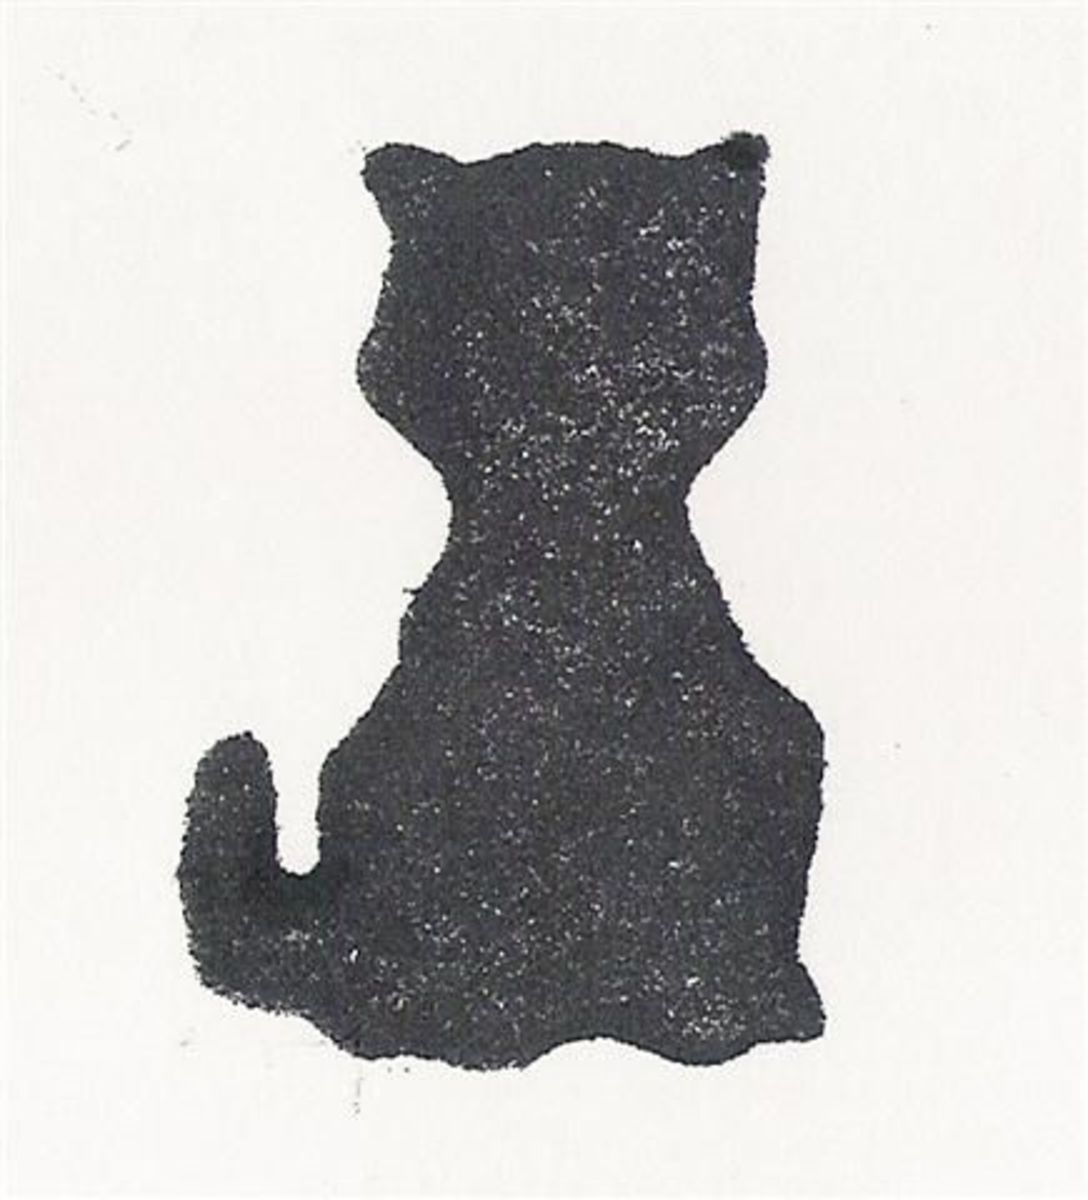 Here's the little cat stamped in black.